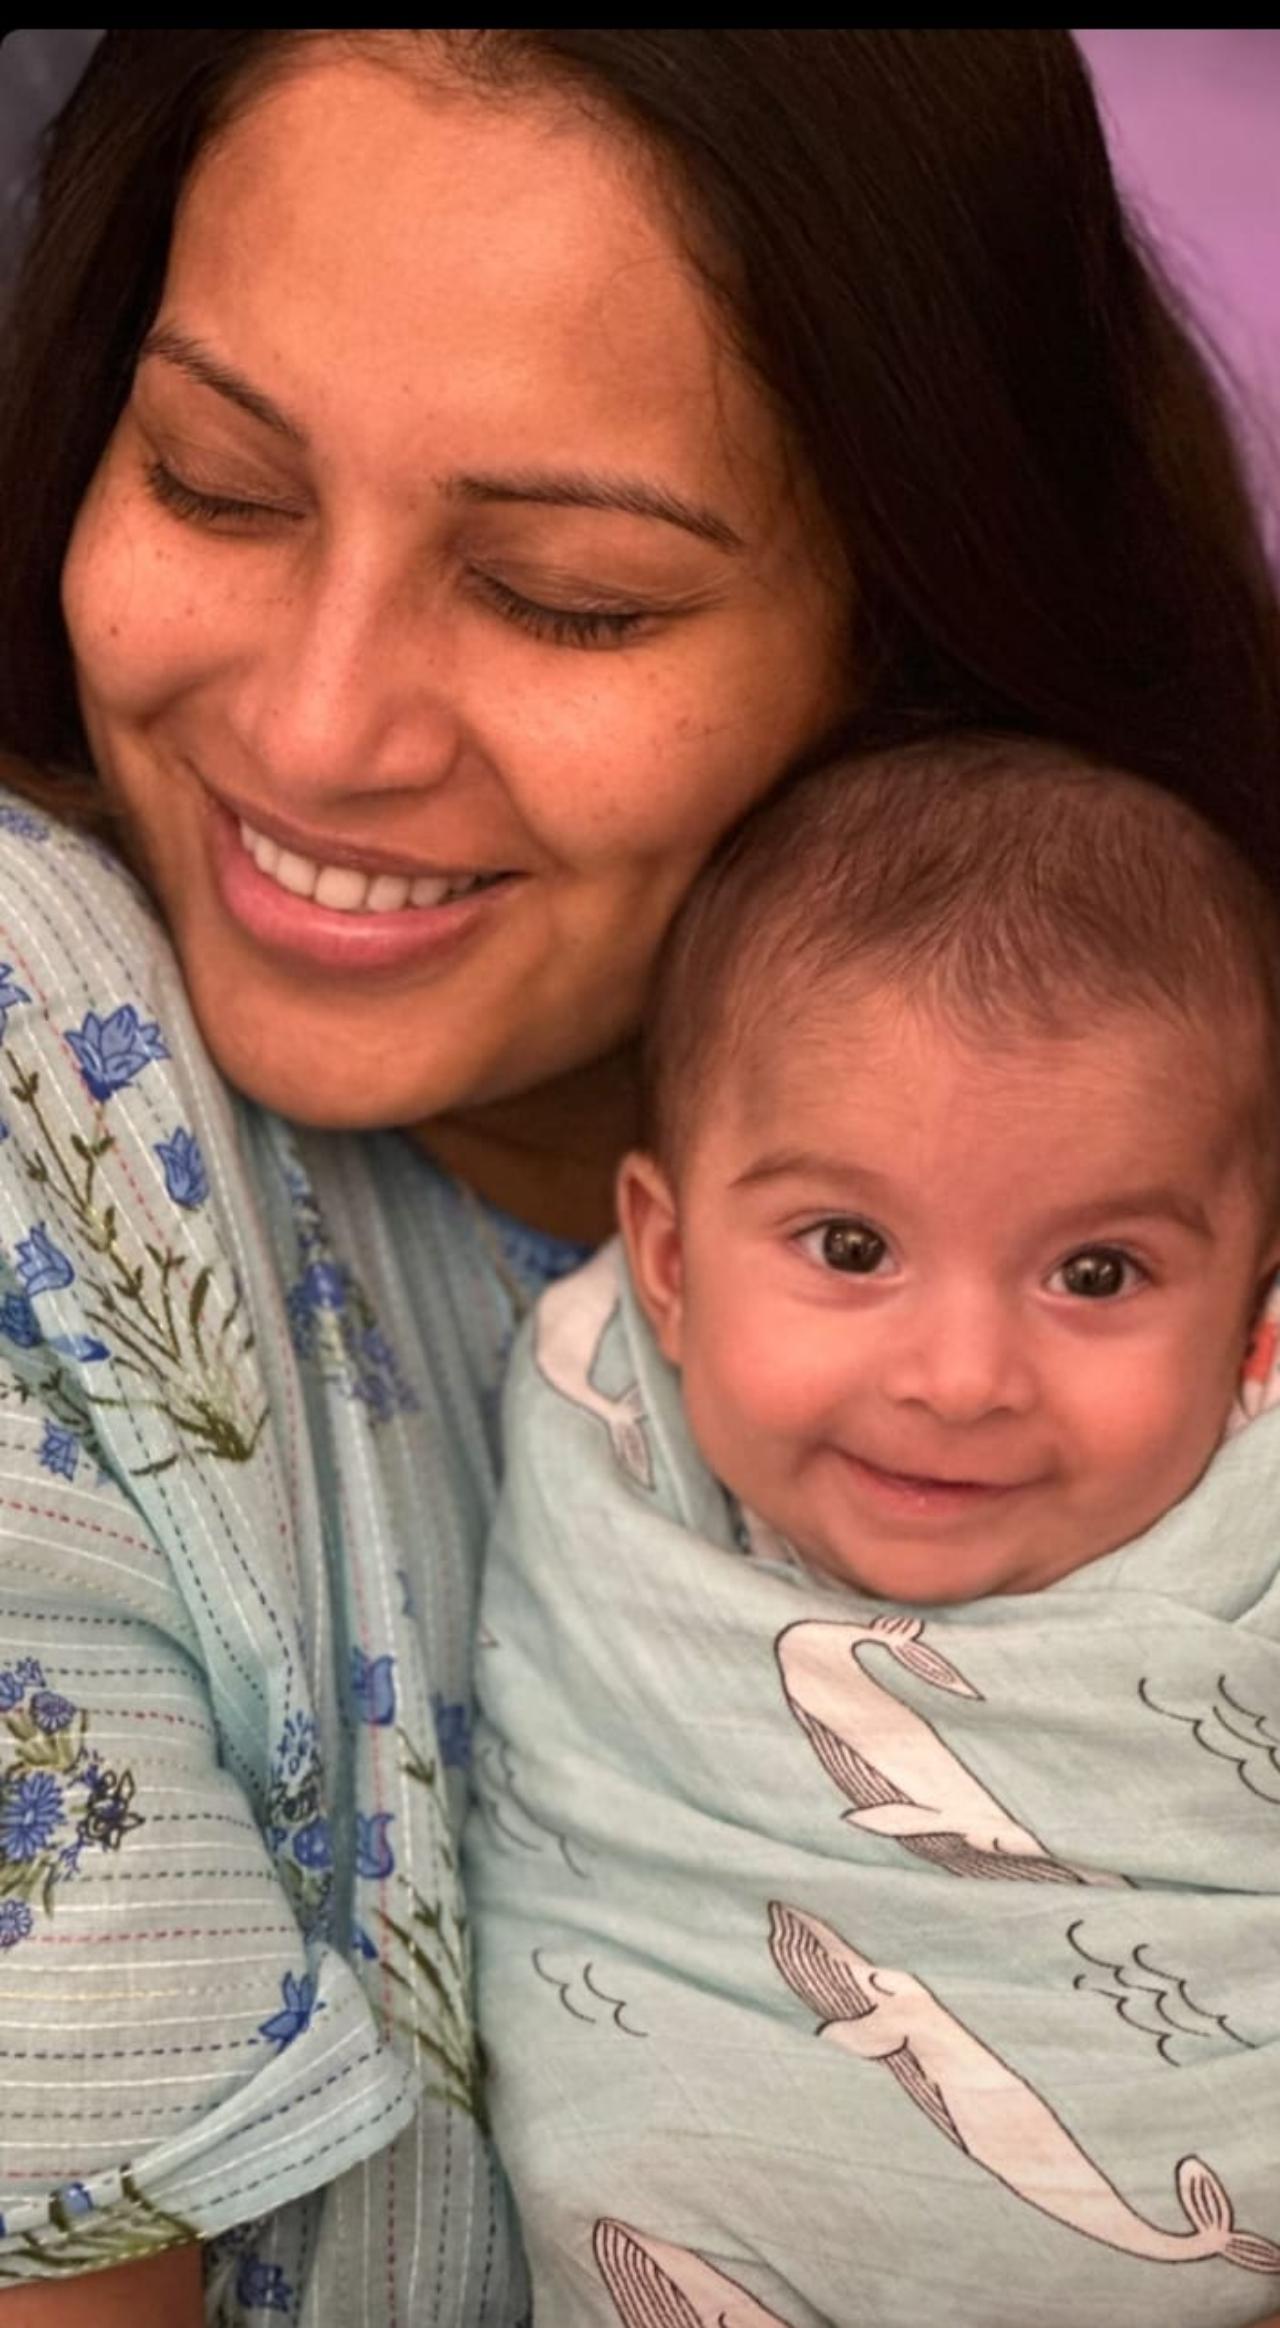 Bipasha Basu had first shared this adorable picture with her daughter on her Instagram stories but later deleted it and shared fresh set of pictures of Devi